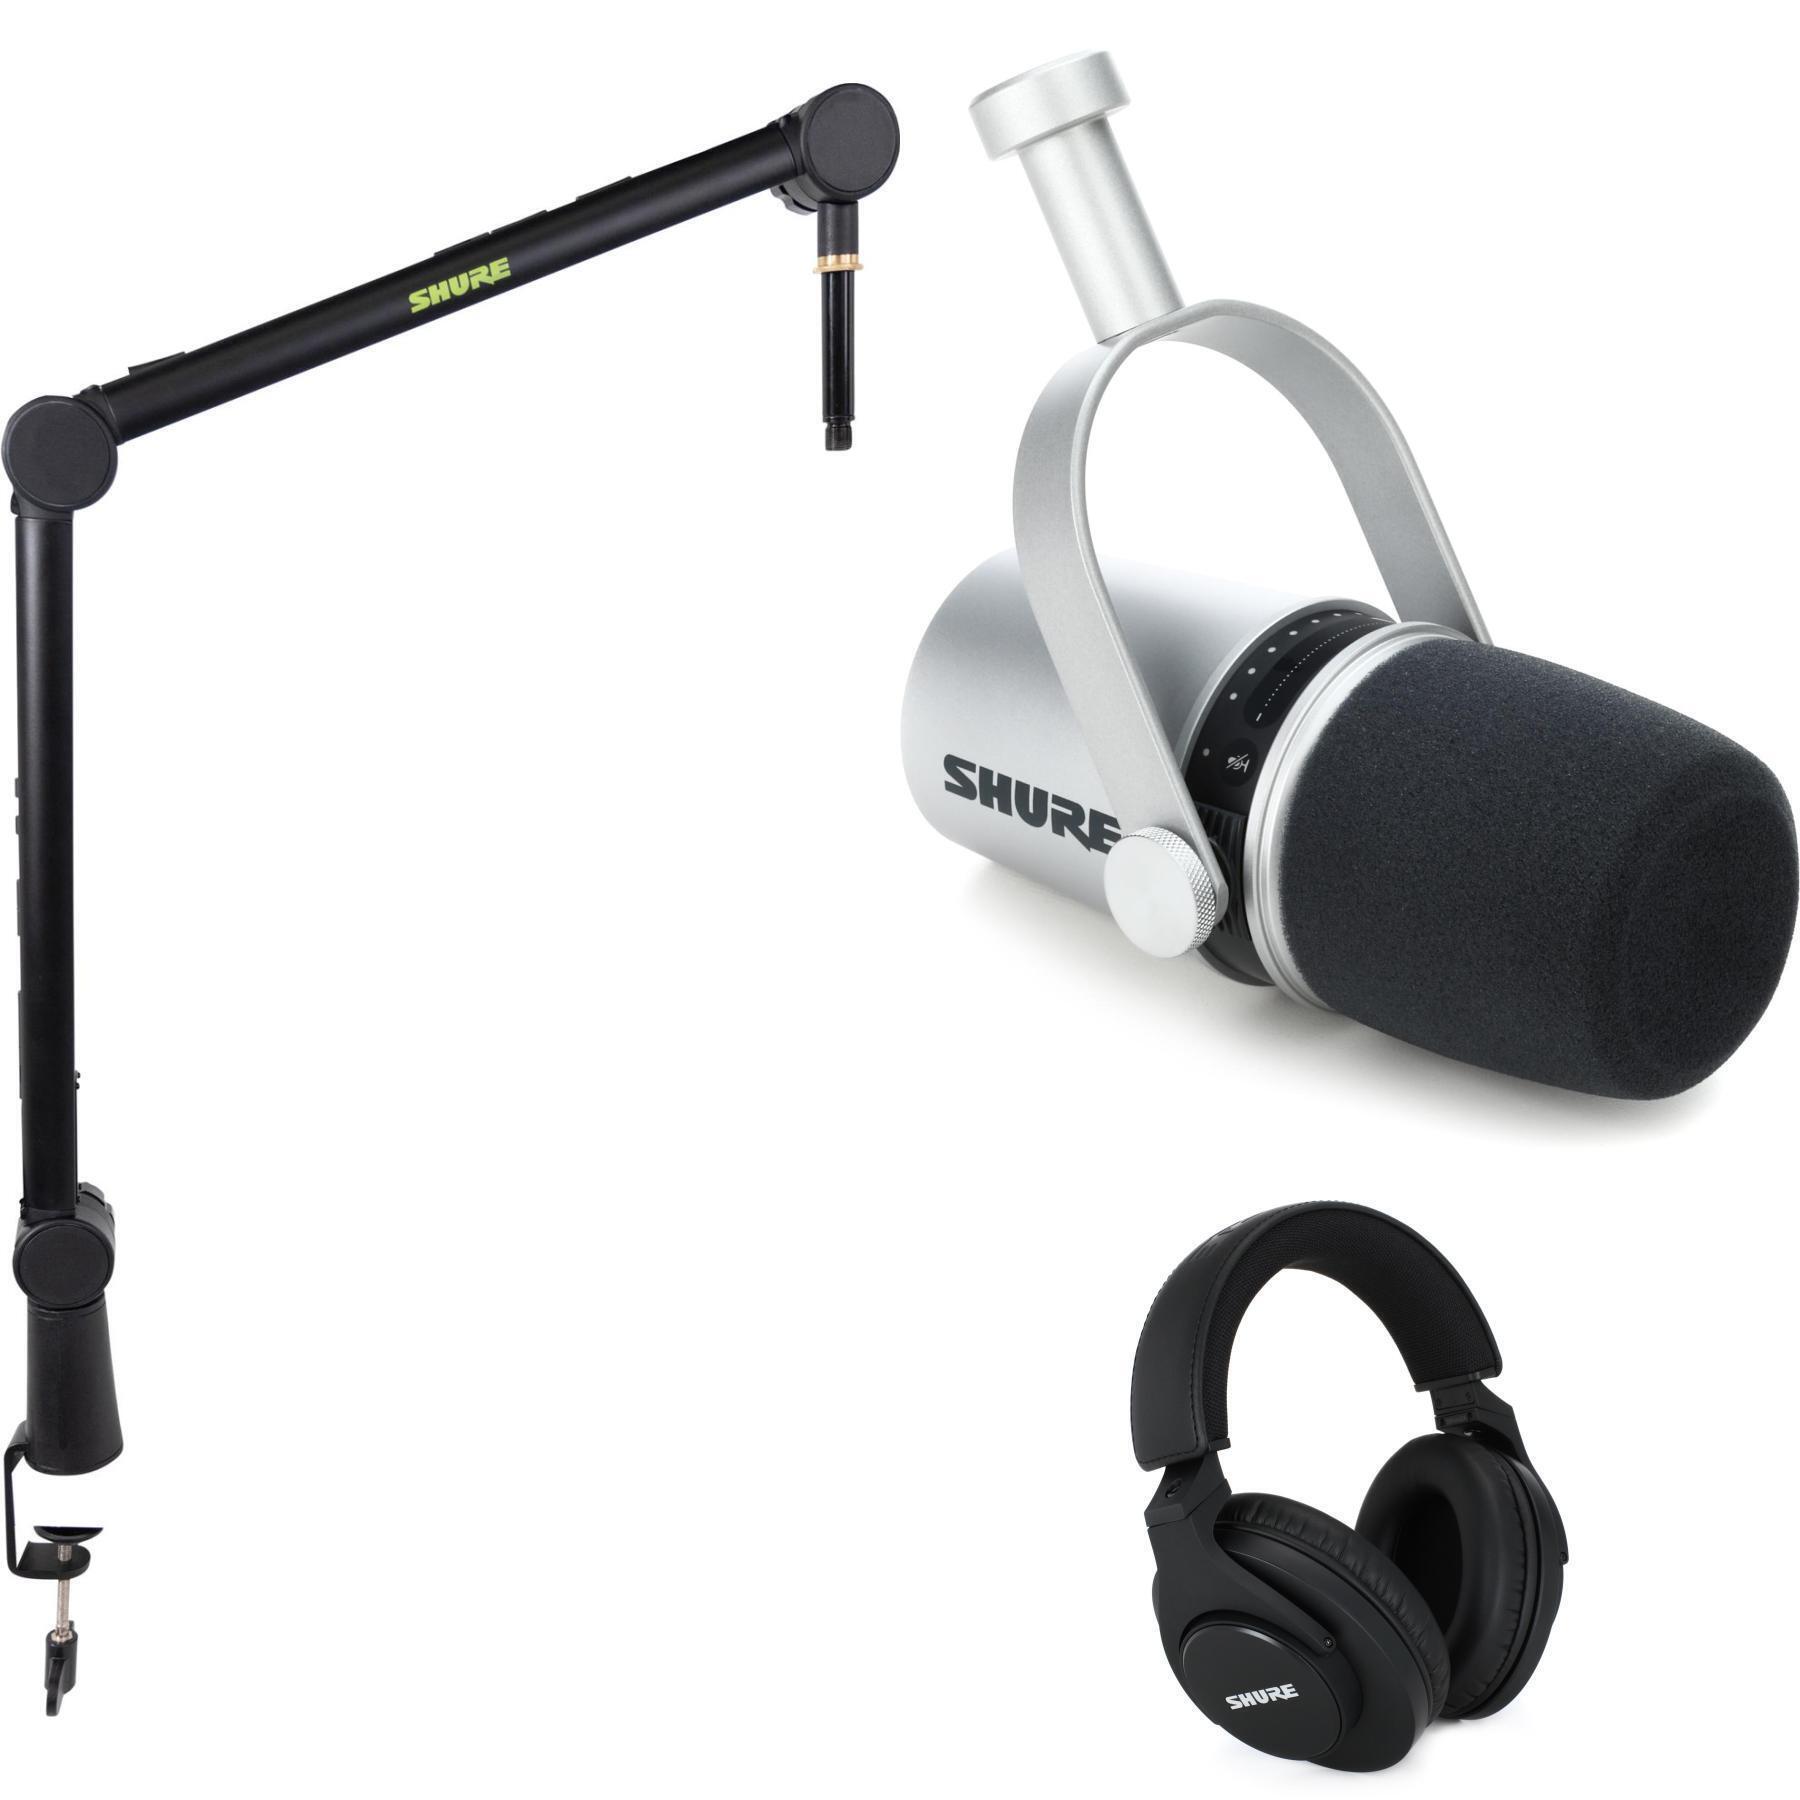 Shure Bundle, Compass Microphone Boom Arm w/ MV7-S Dynamic Microphone  (Silver) and Cable